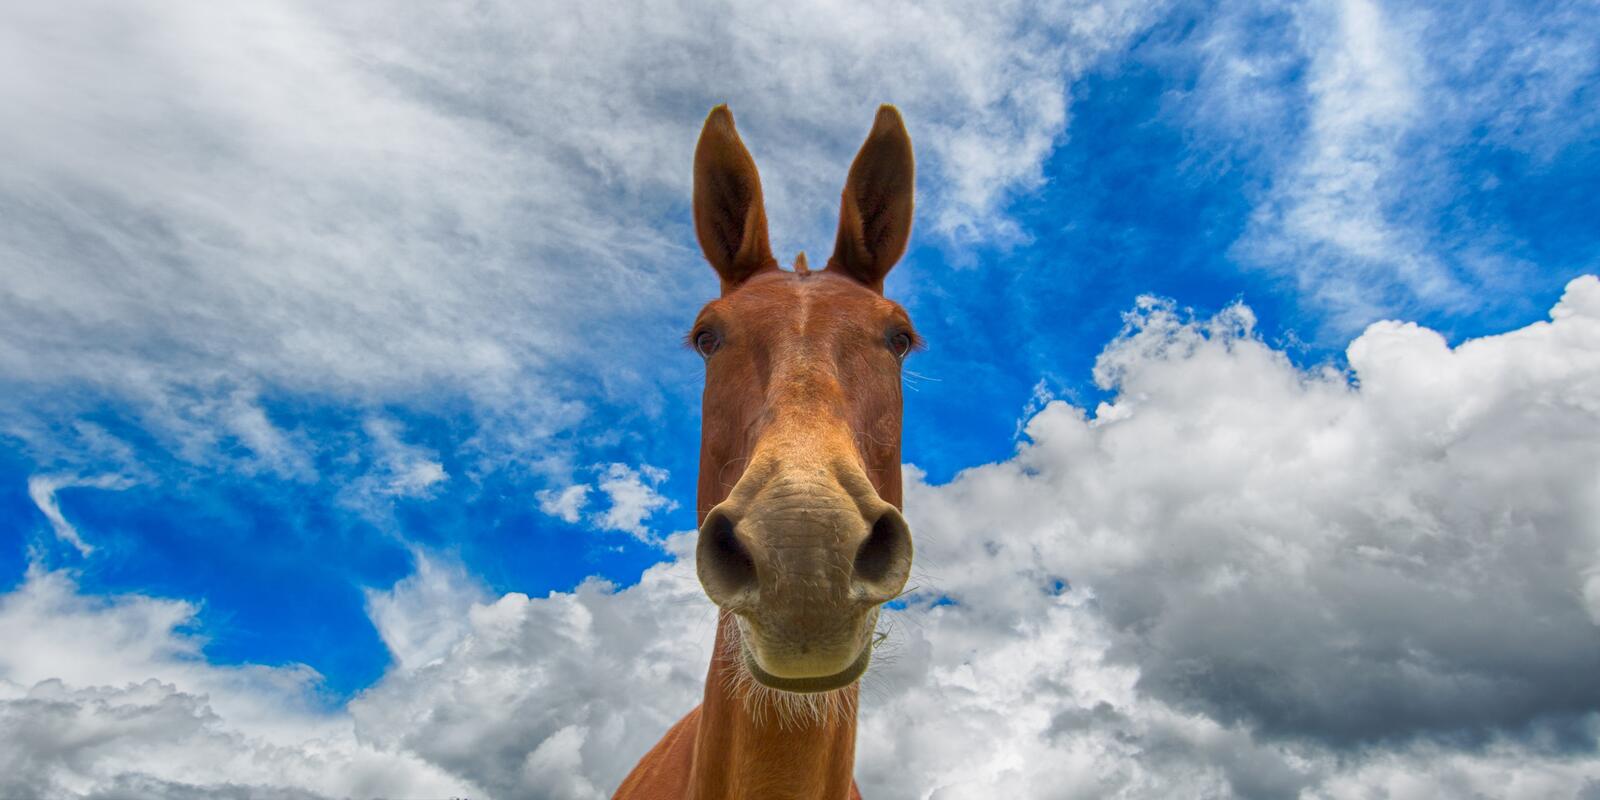 Wallpapers wallpaper horse browse clouds on the desktop